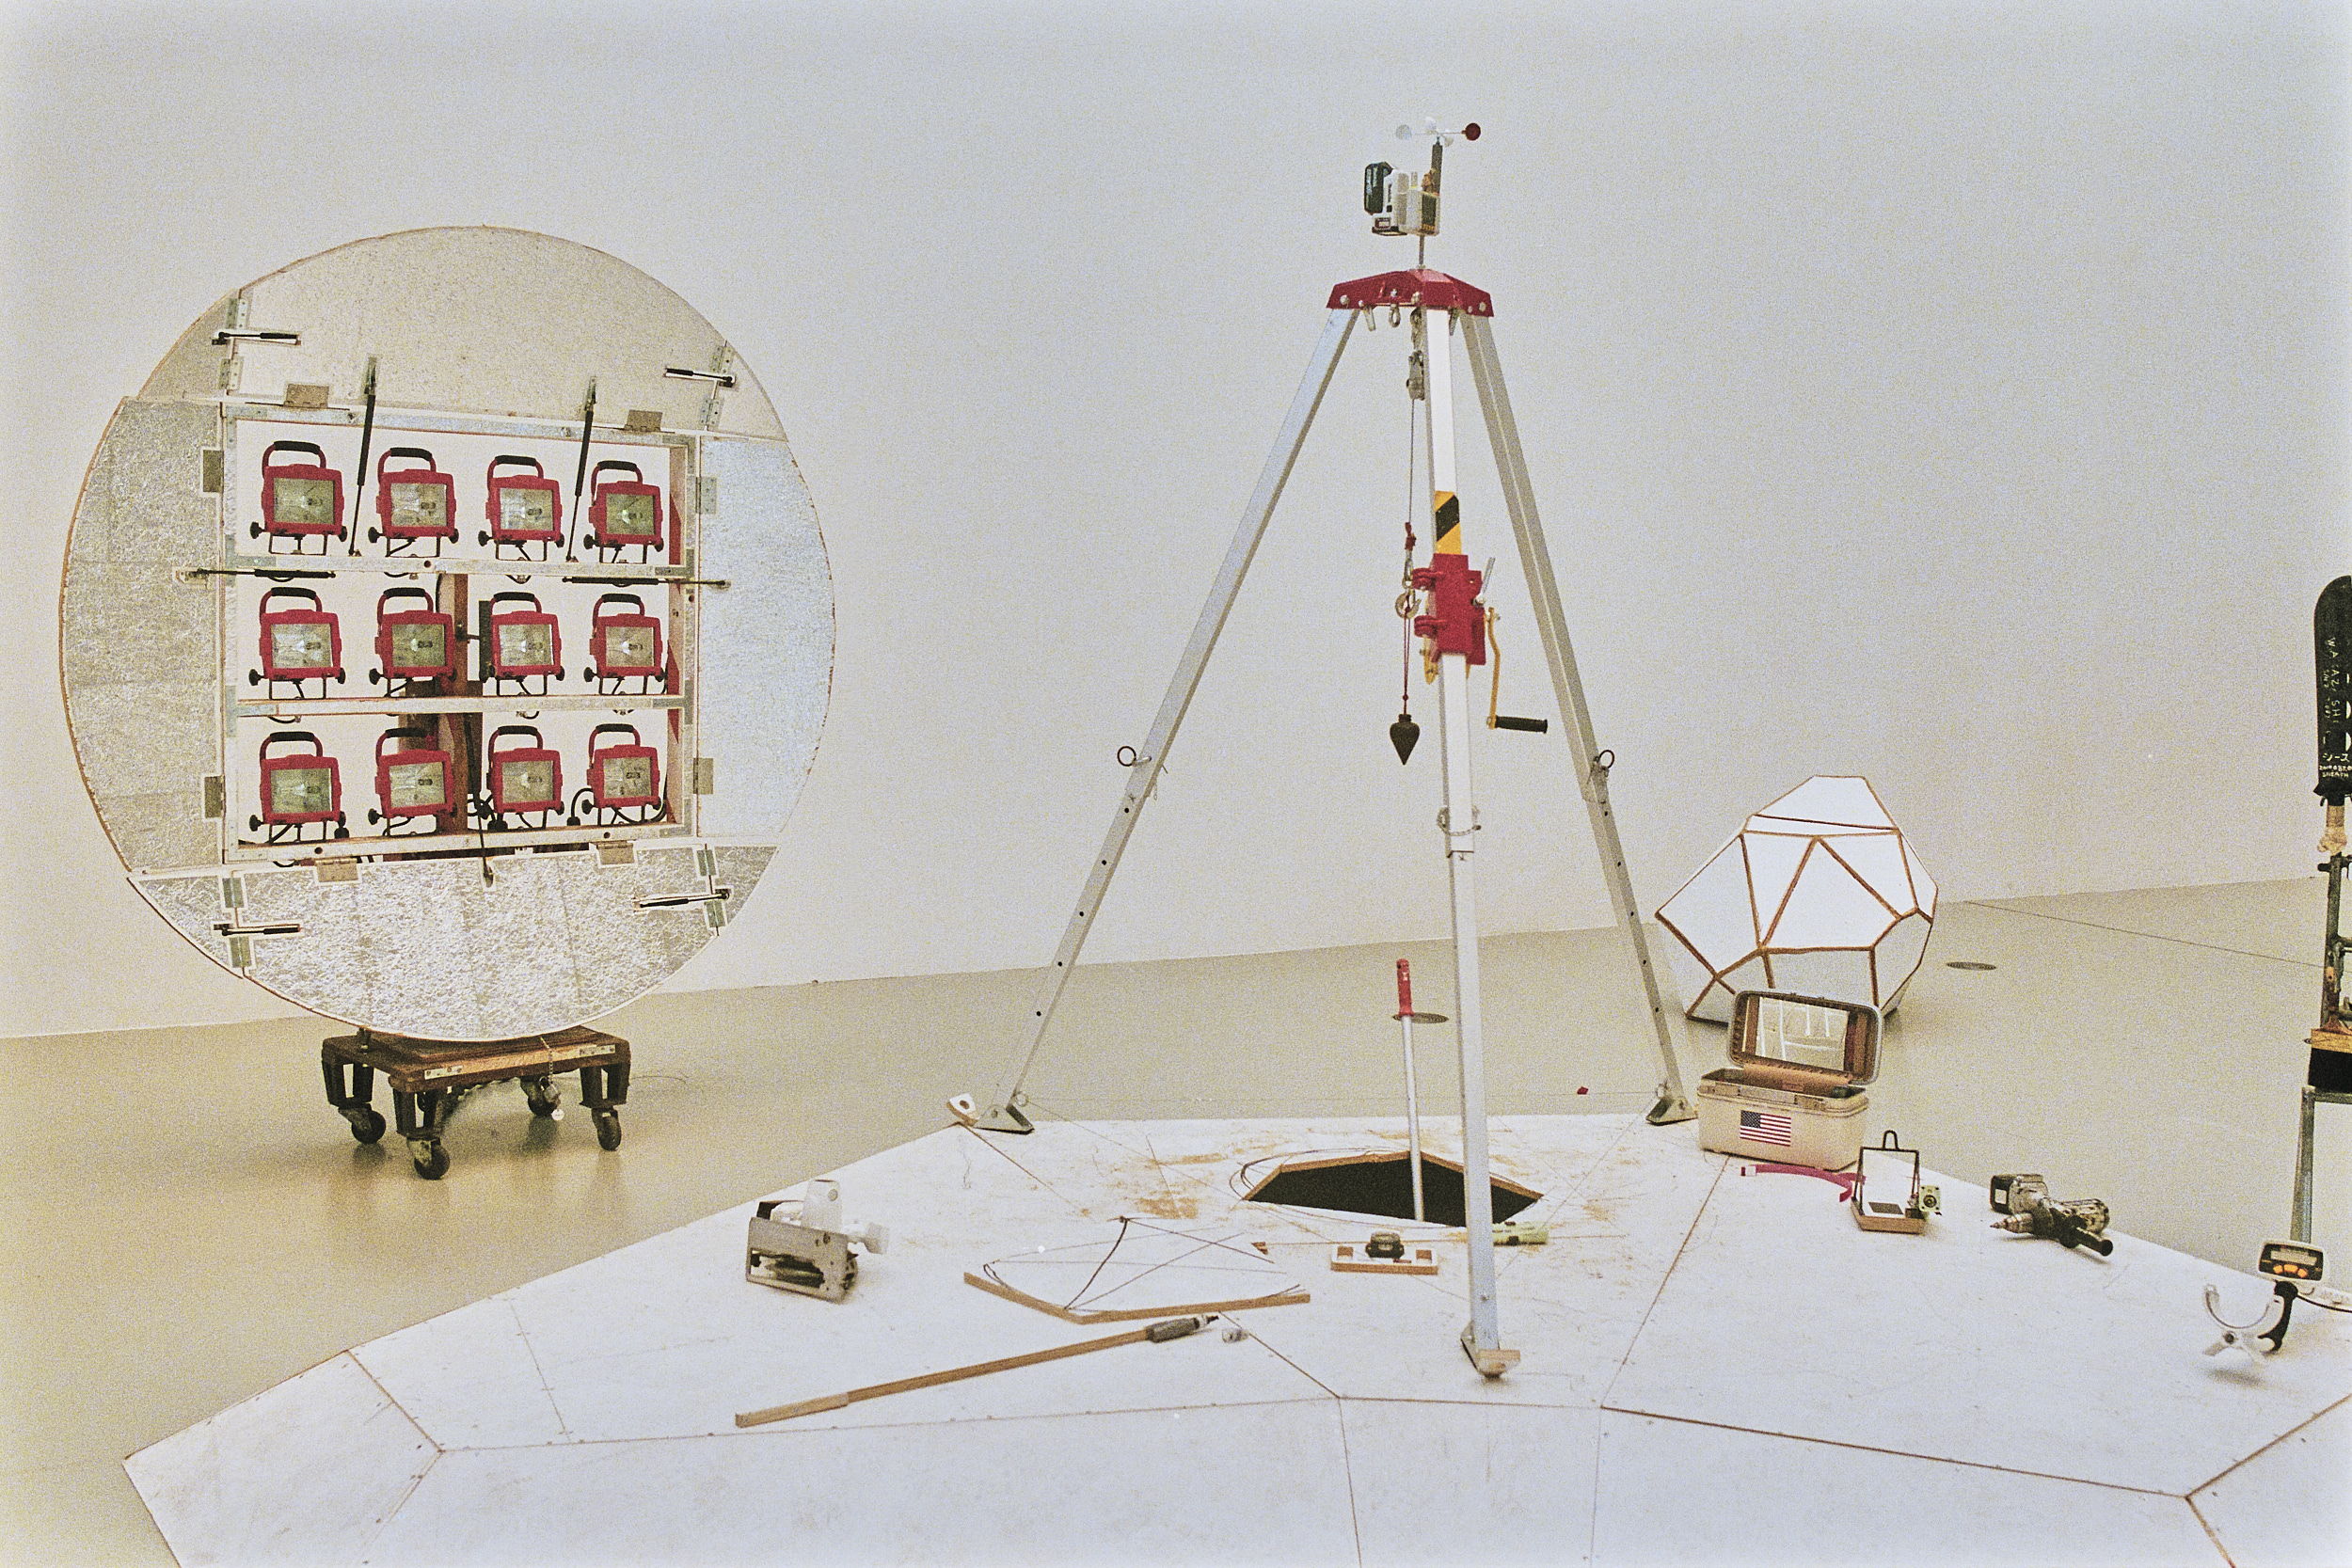 inside the launch of tom sachs space program: rare earths at